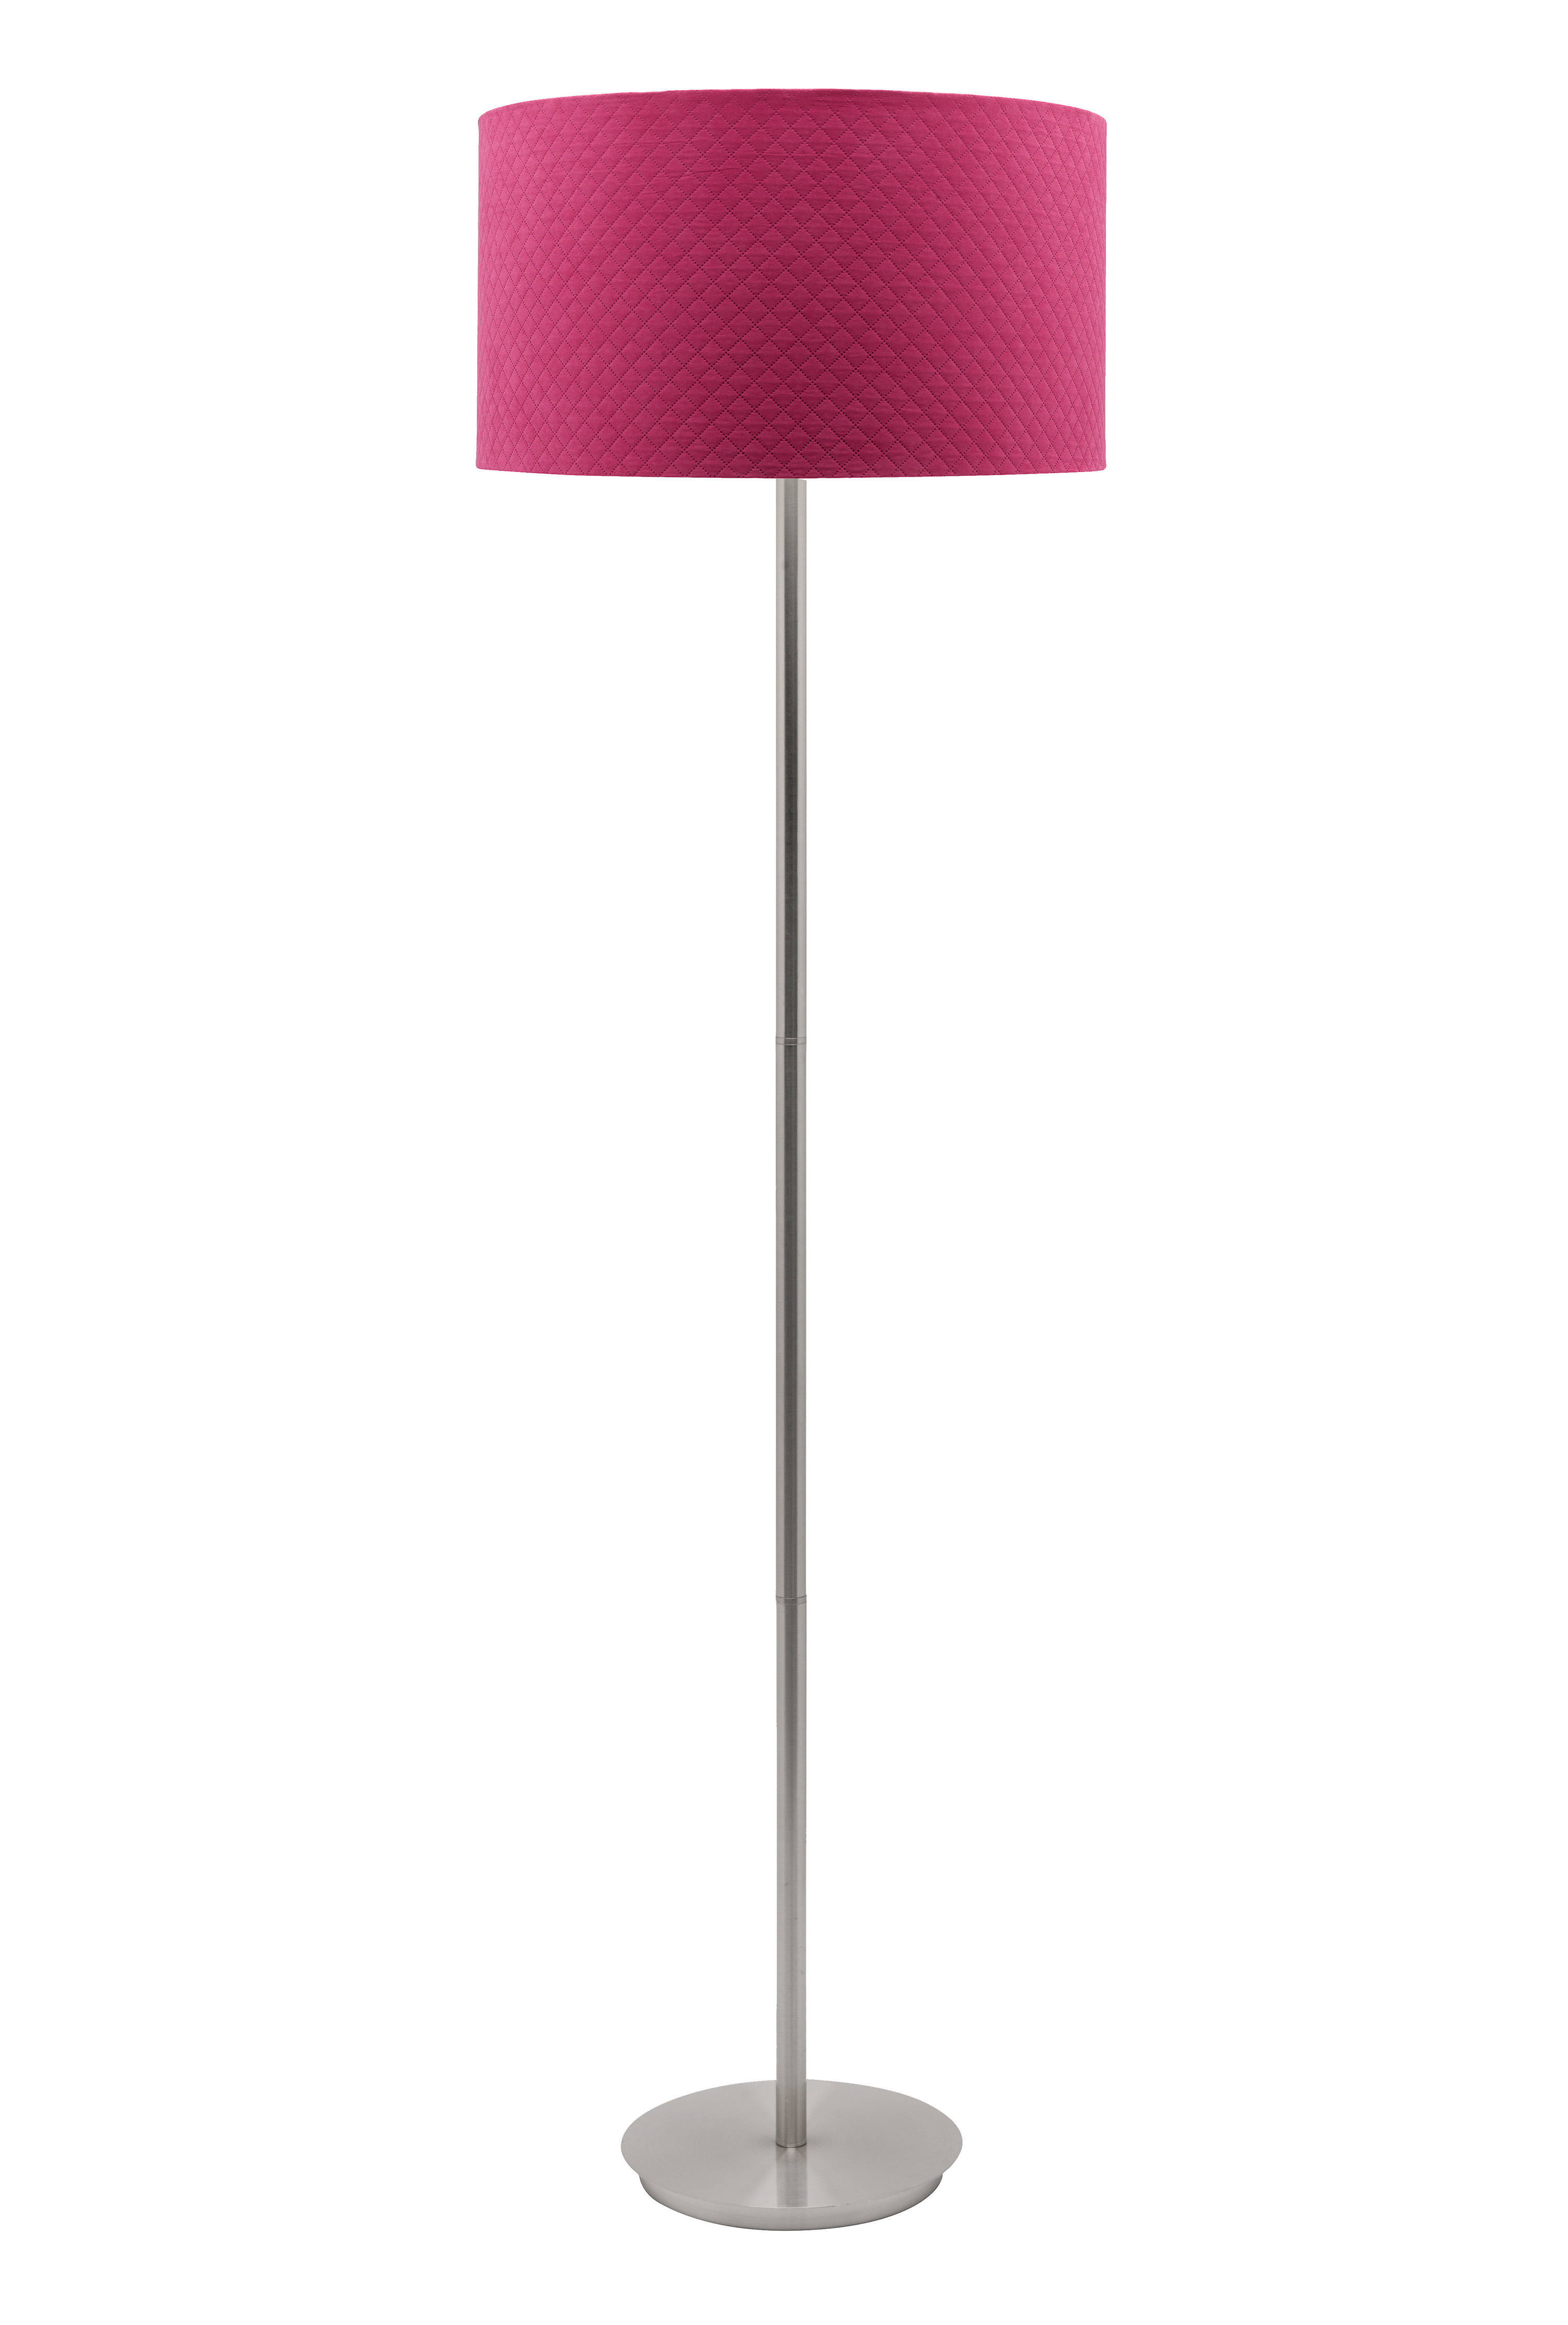 Flynn Peppe Pink Floor Lamp with size 3000 X 4448